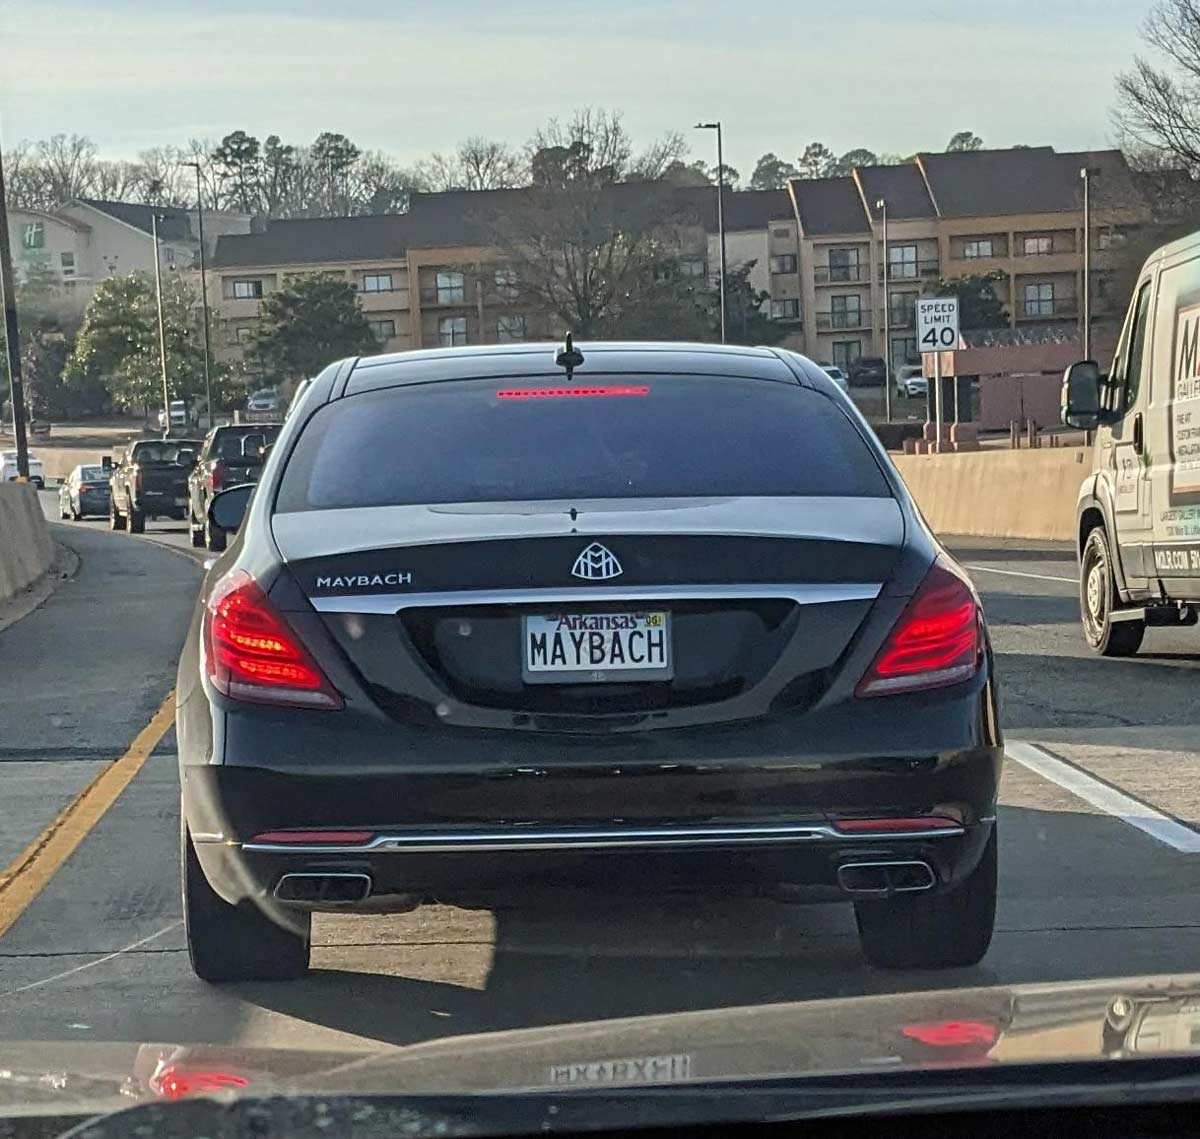 Guess they really want everyone to know they drive a Maybach